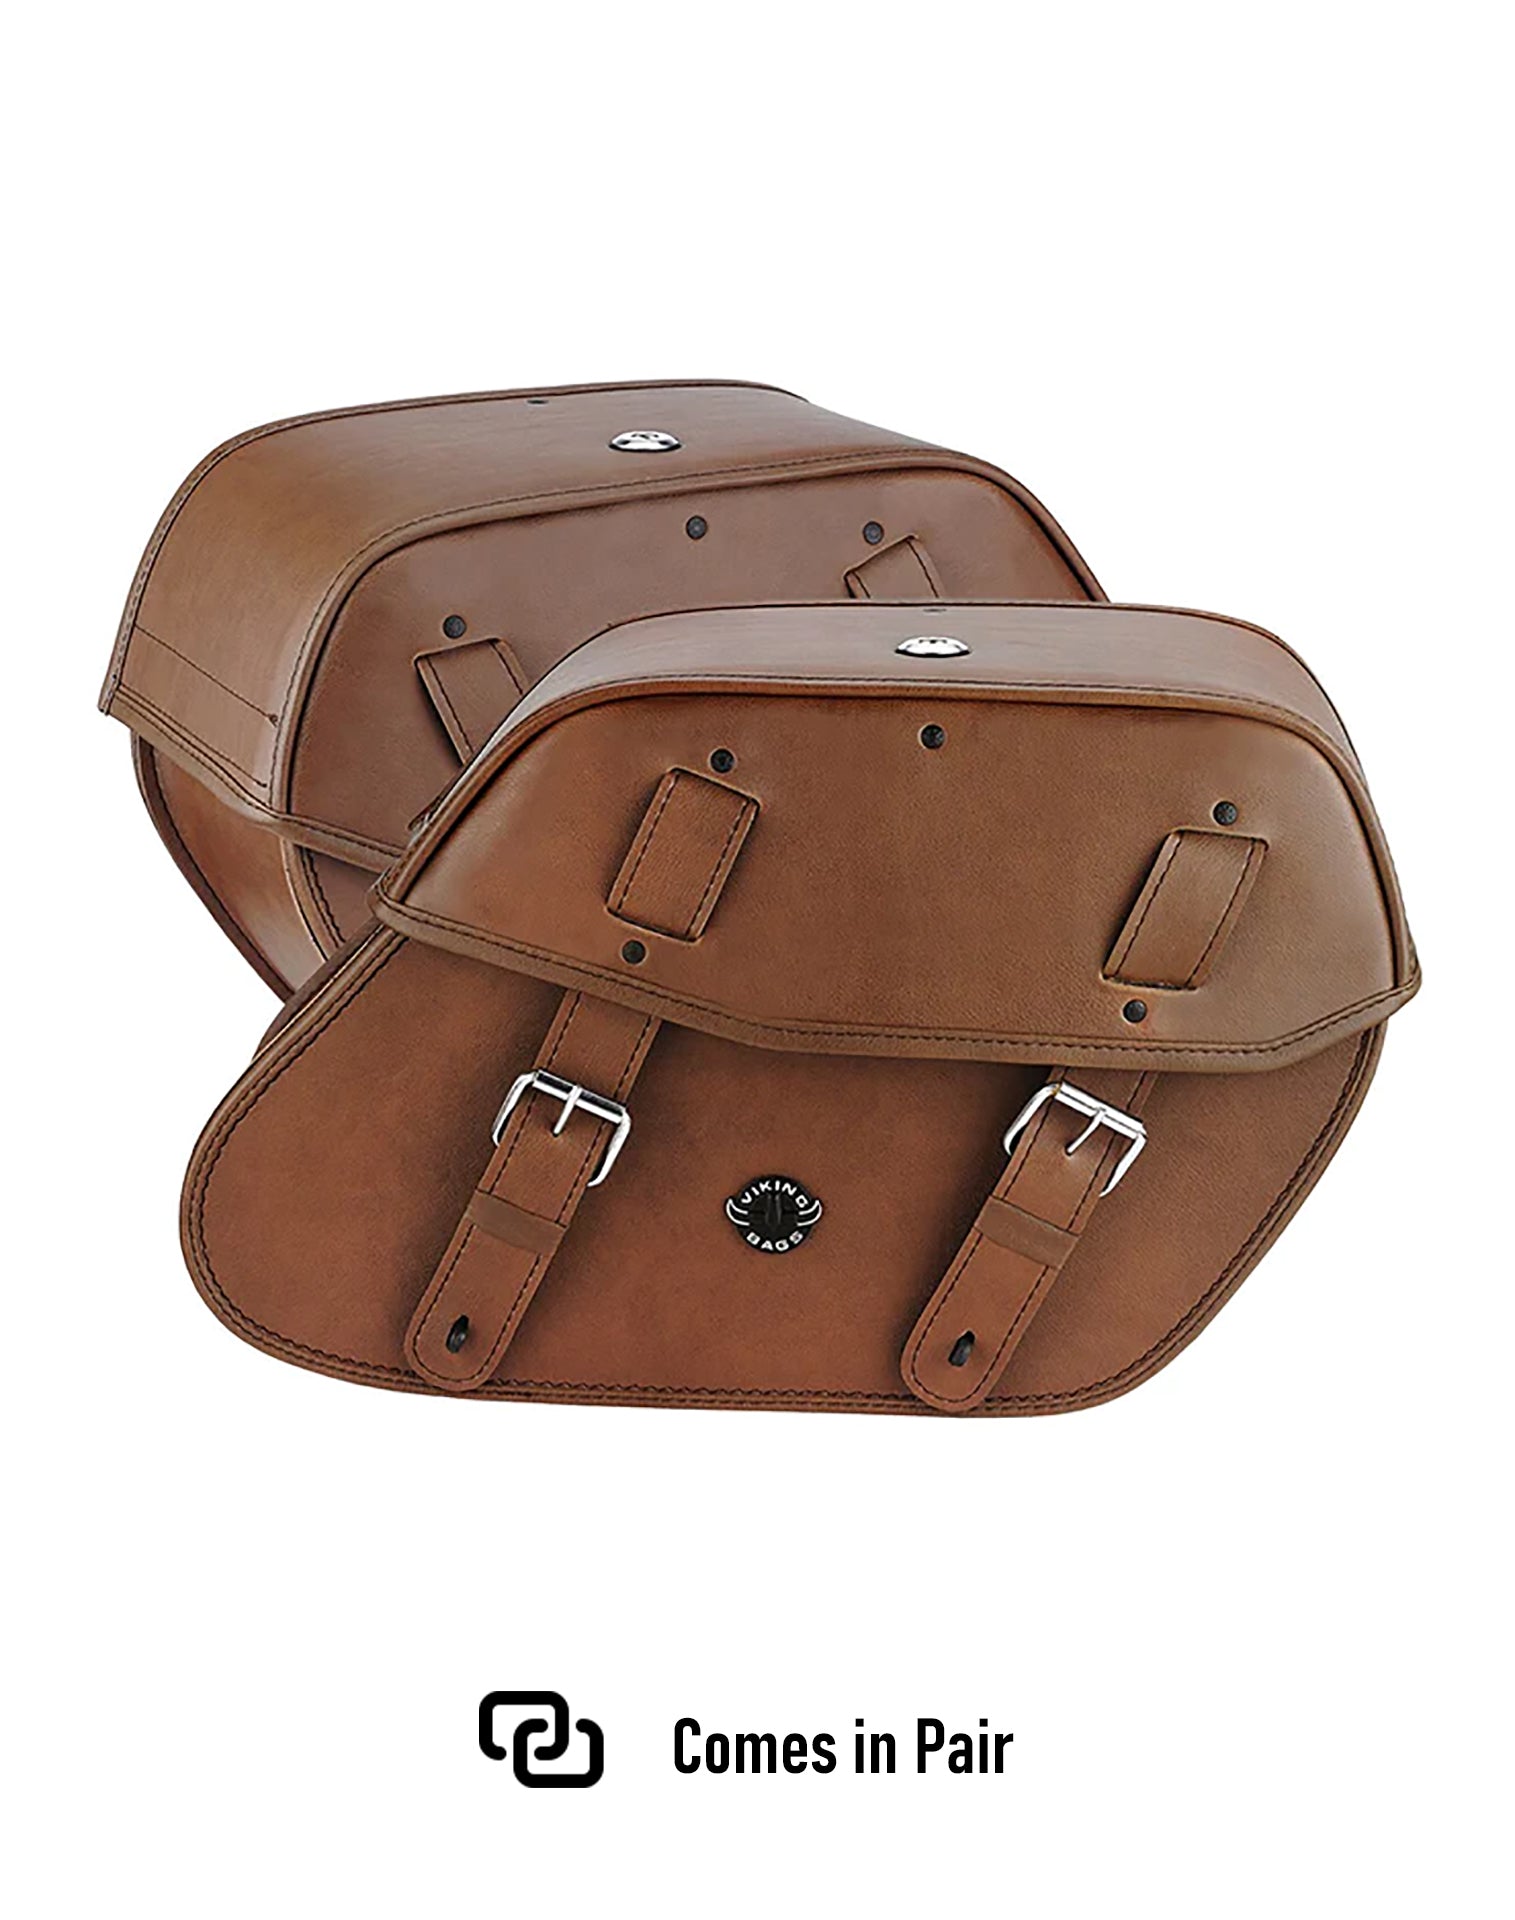 Viking Odin Brown Large Triumph Thunderbird Leather Motorcycle Saddlebags Weather Resistant Bags Comes in Pair